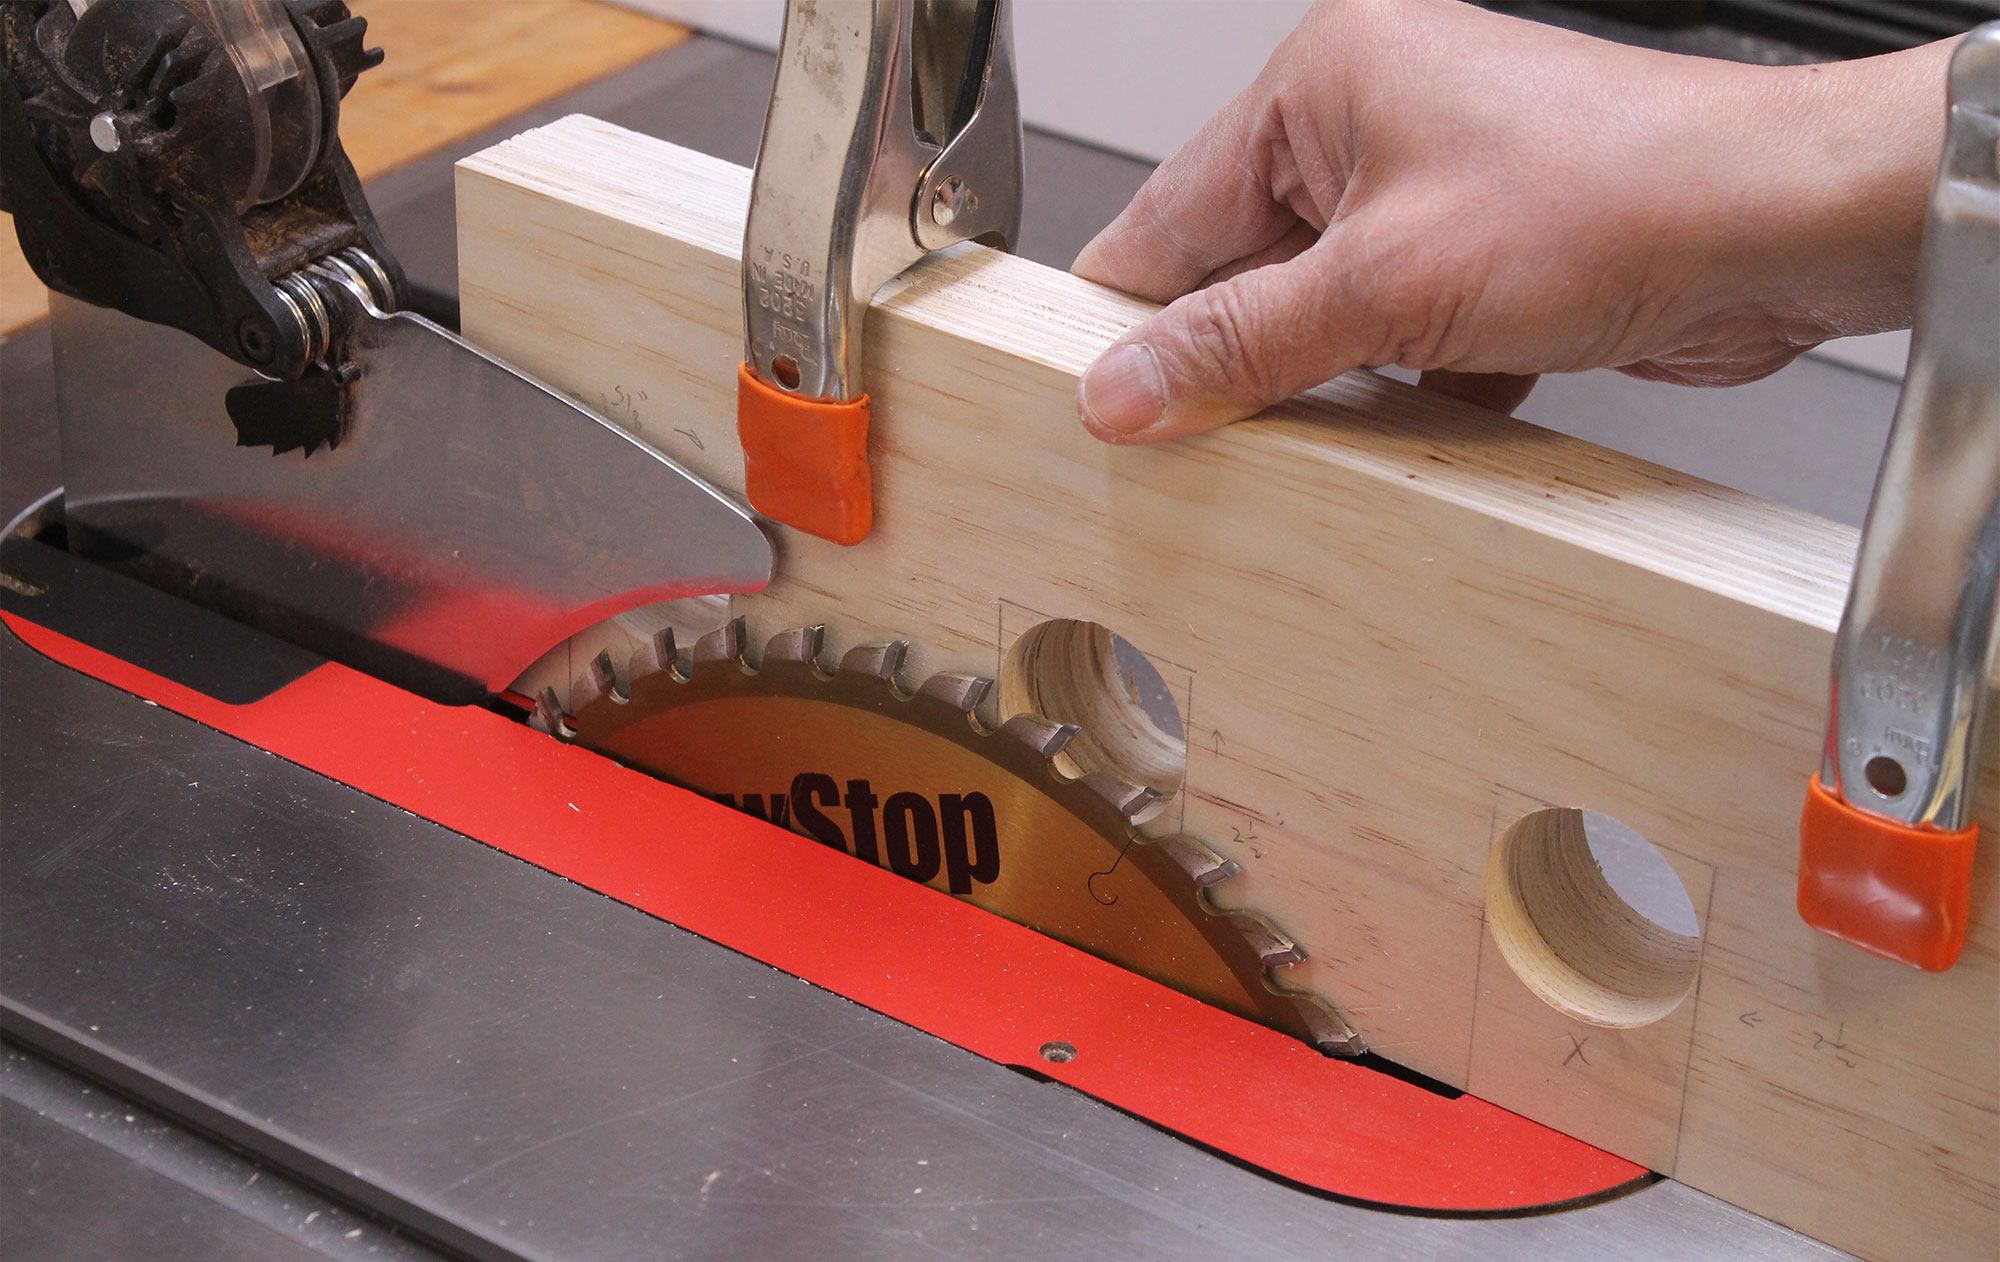 Setting blade height using the rack stood on its edge on the table saw.